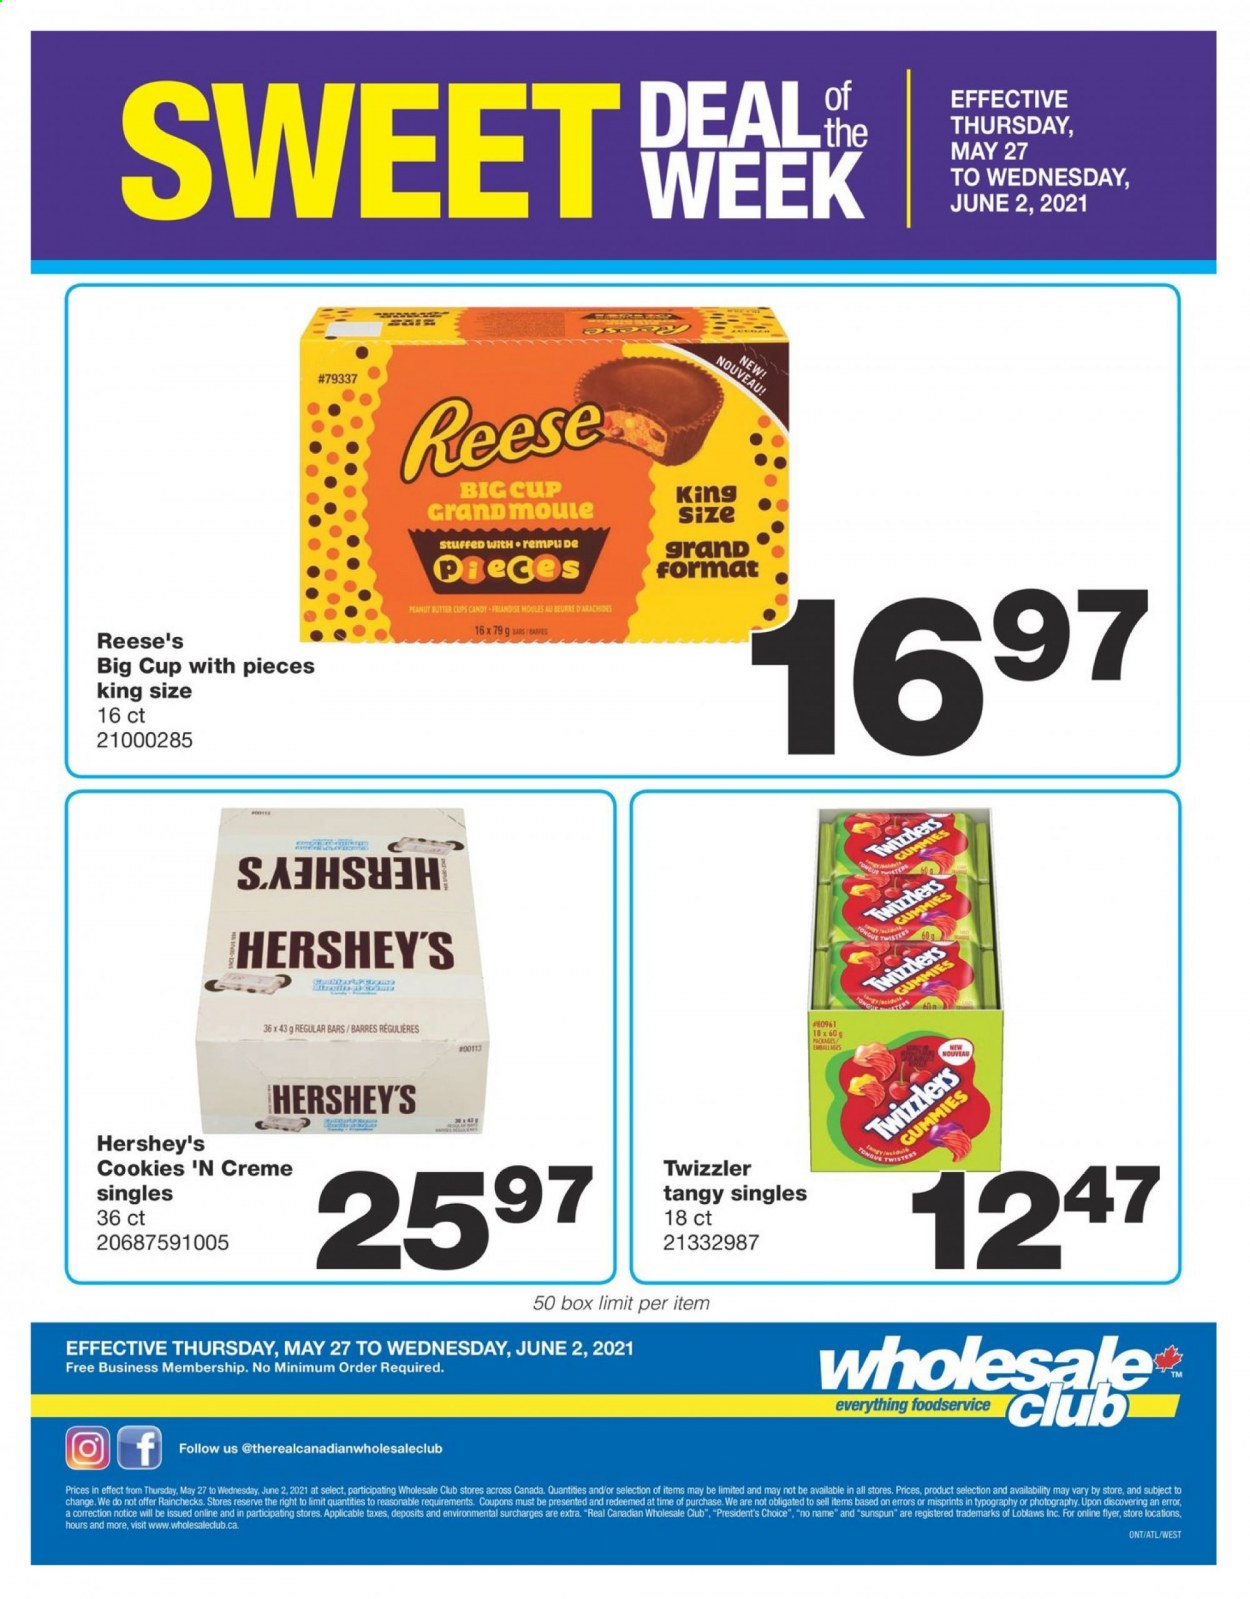 thumbnail - Wholesale Club Flyer - May 27, 2021 - June 02, 2021 - Sales products - No Name, Président, Reese's, Hershey's, cookies, peanut butter cups. Page 1.